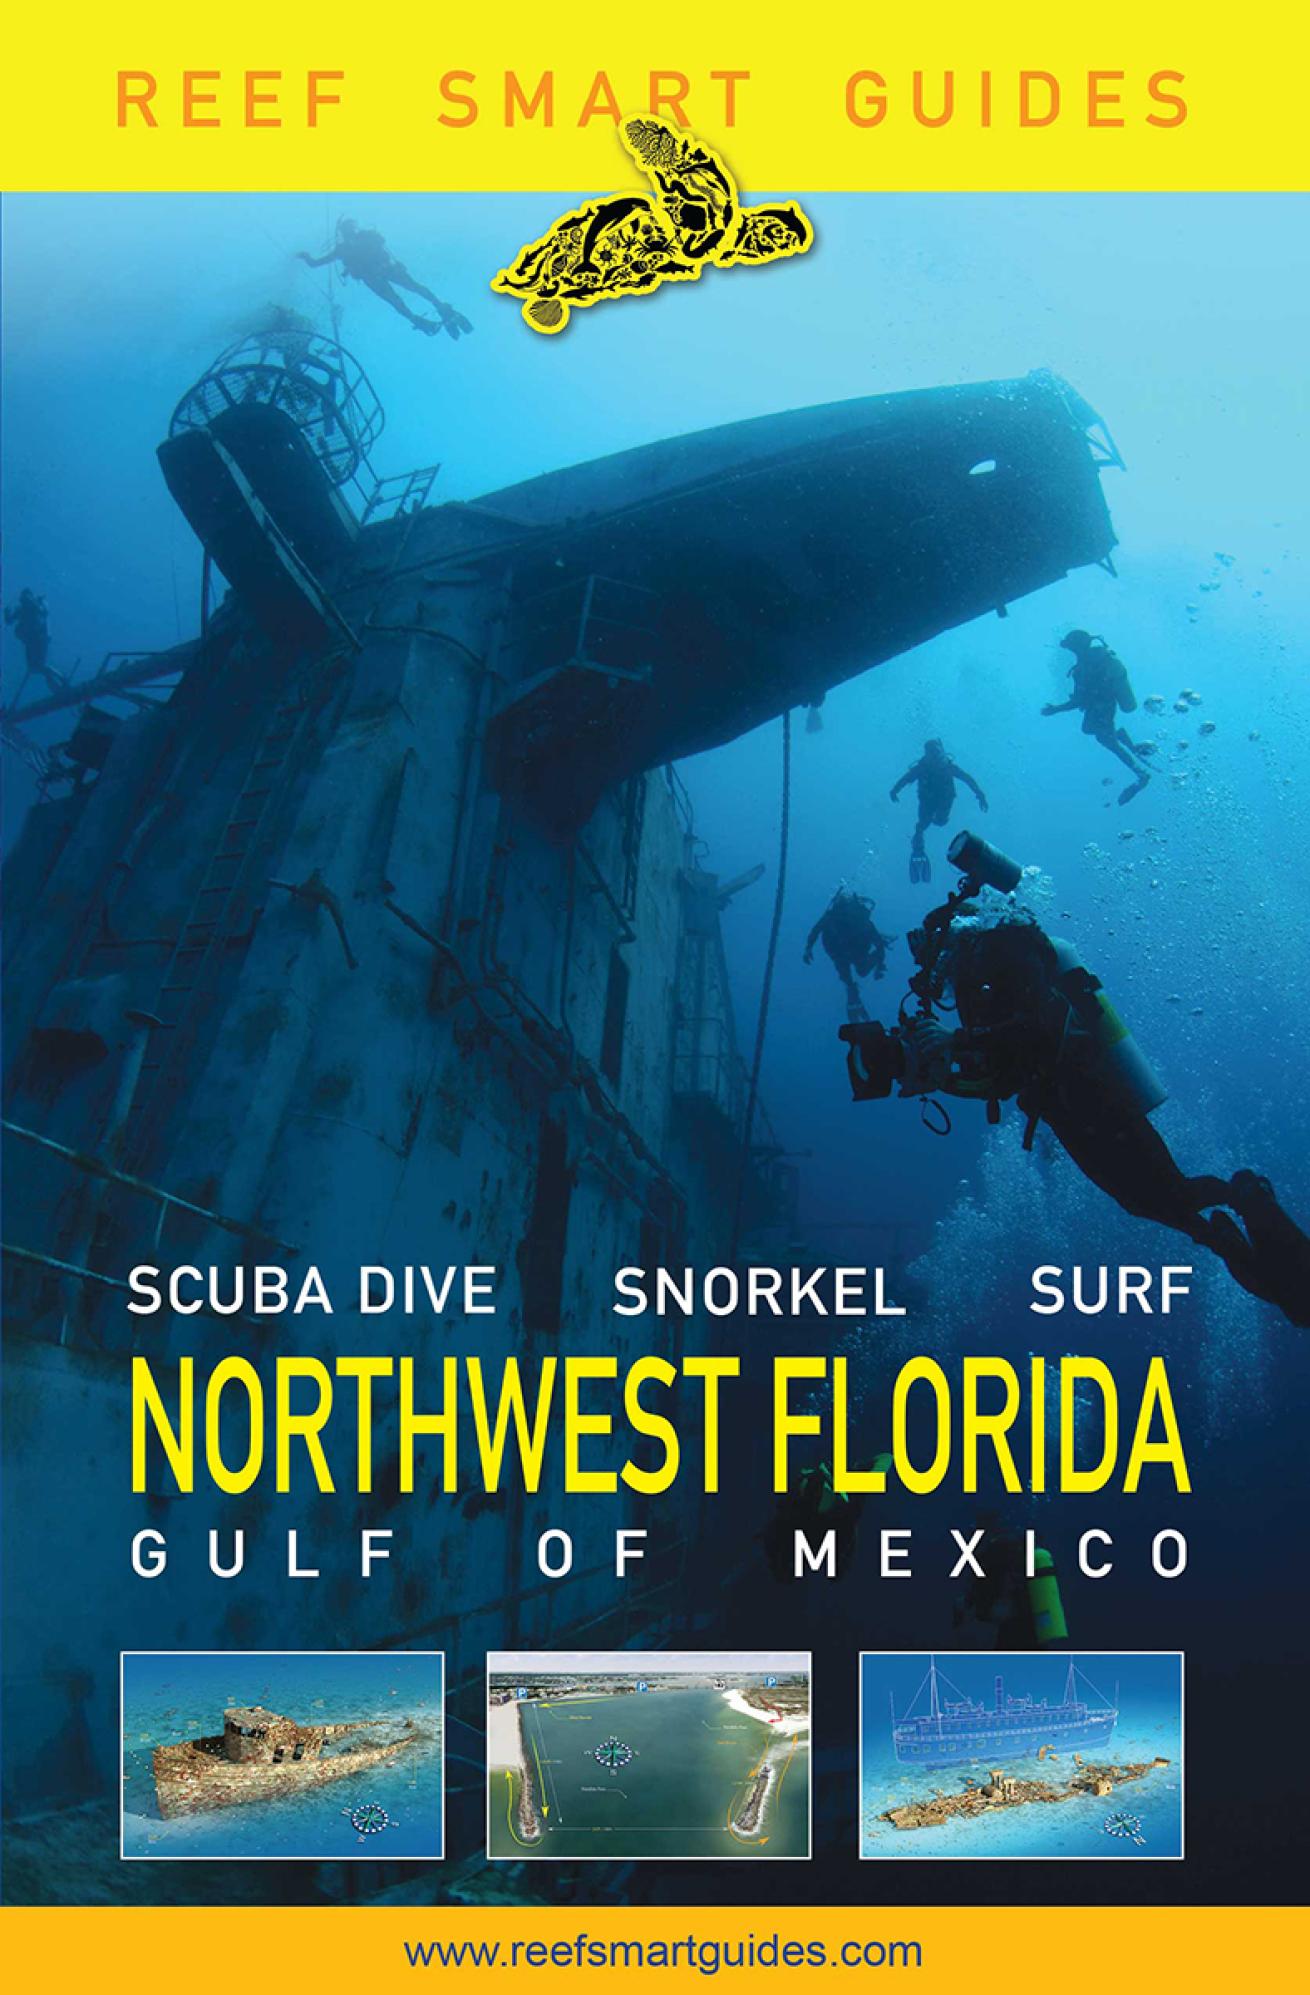 Cover of Reef Smart&#039;s Northwest Florida guide